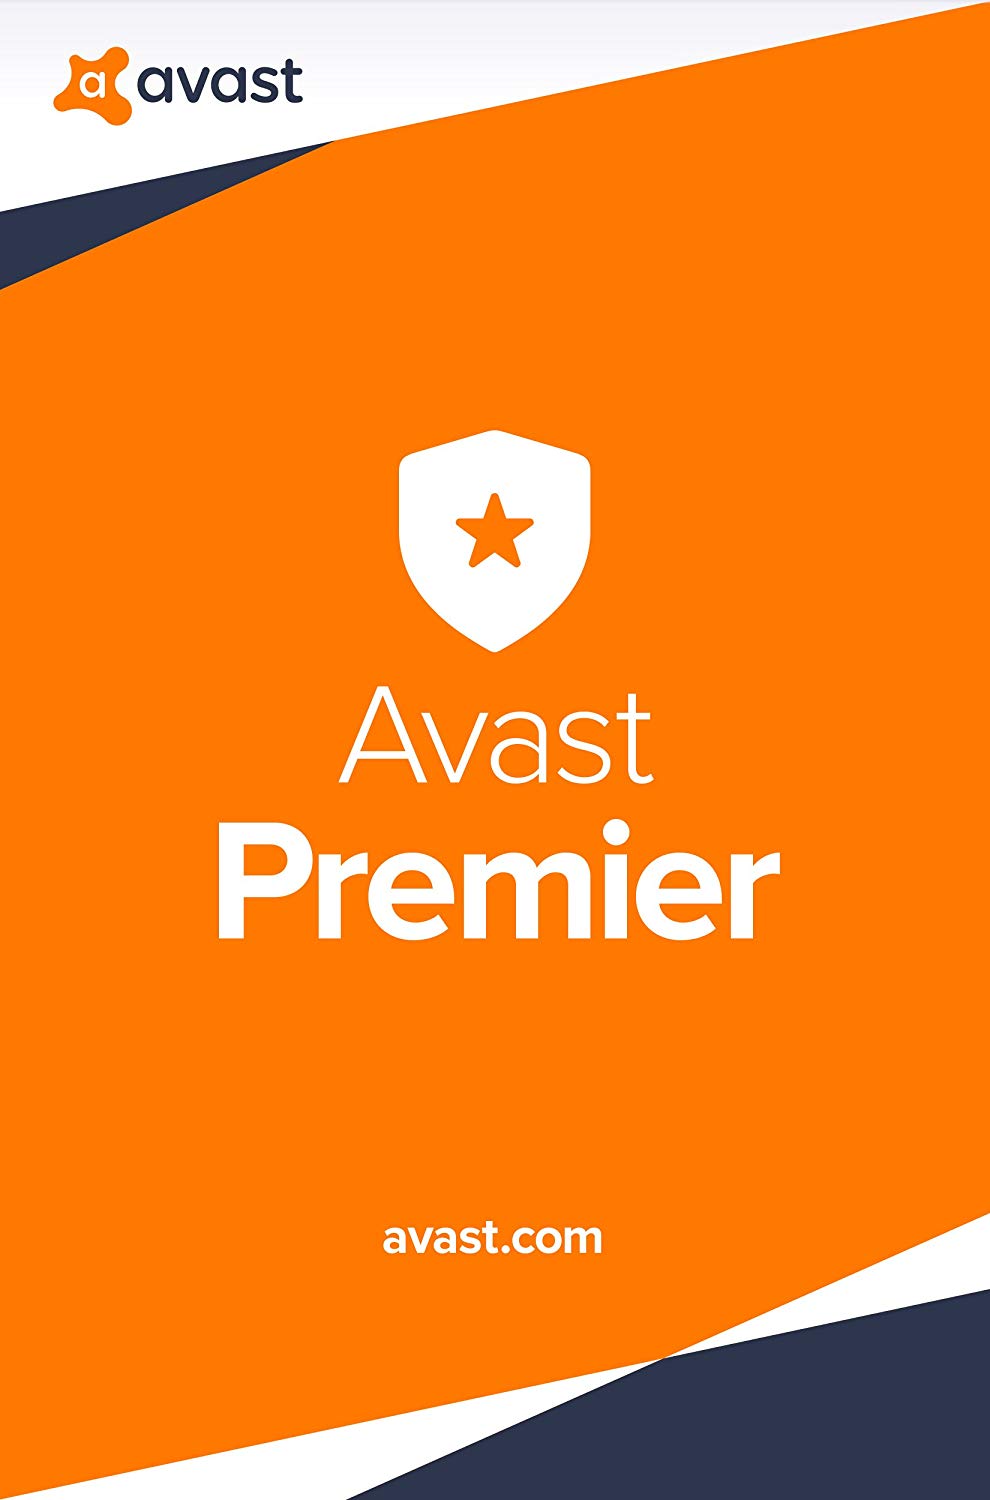 Avast Premier CD Key (Digital Download) - Various Options Available: 5 Devices